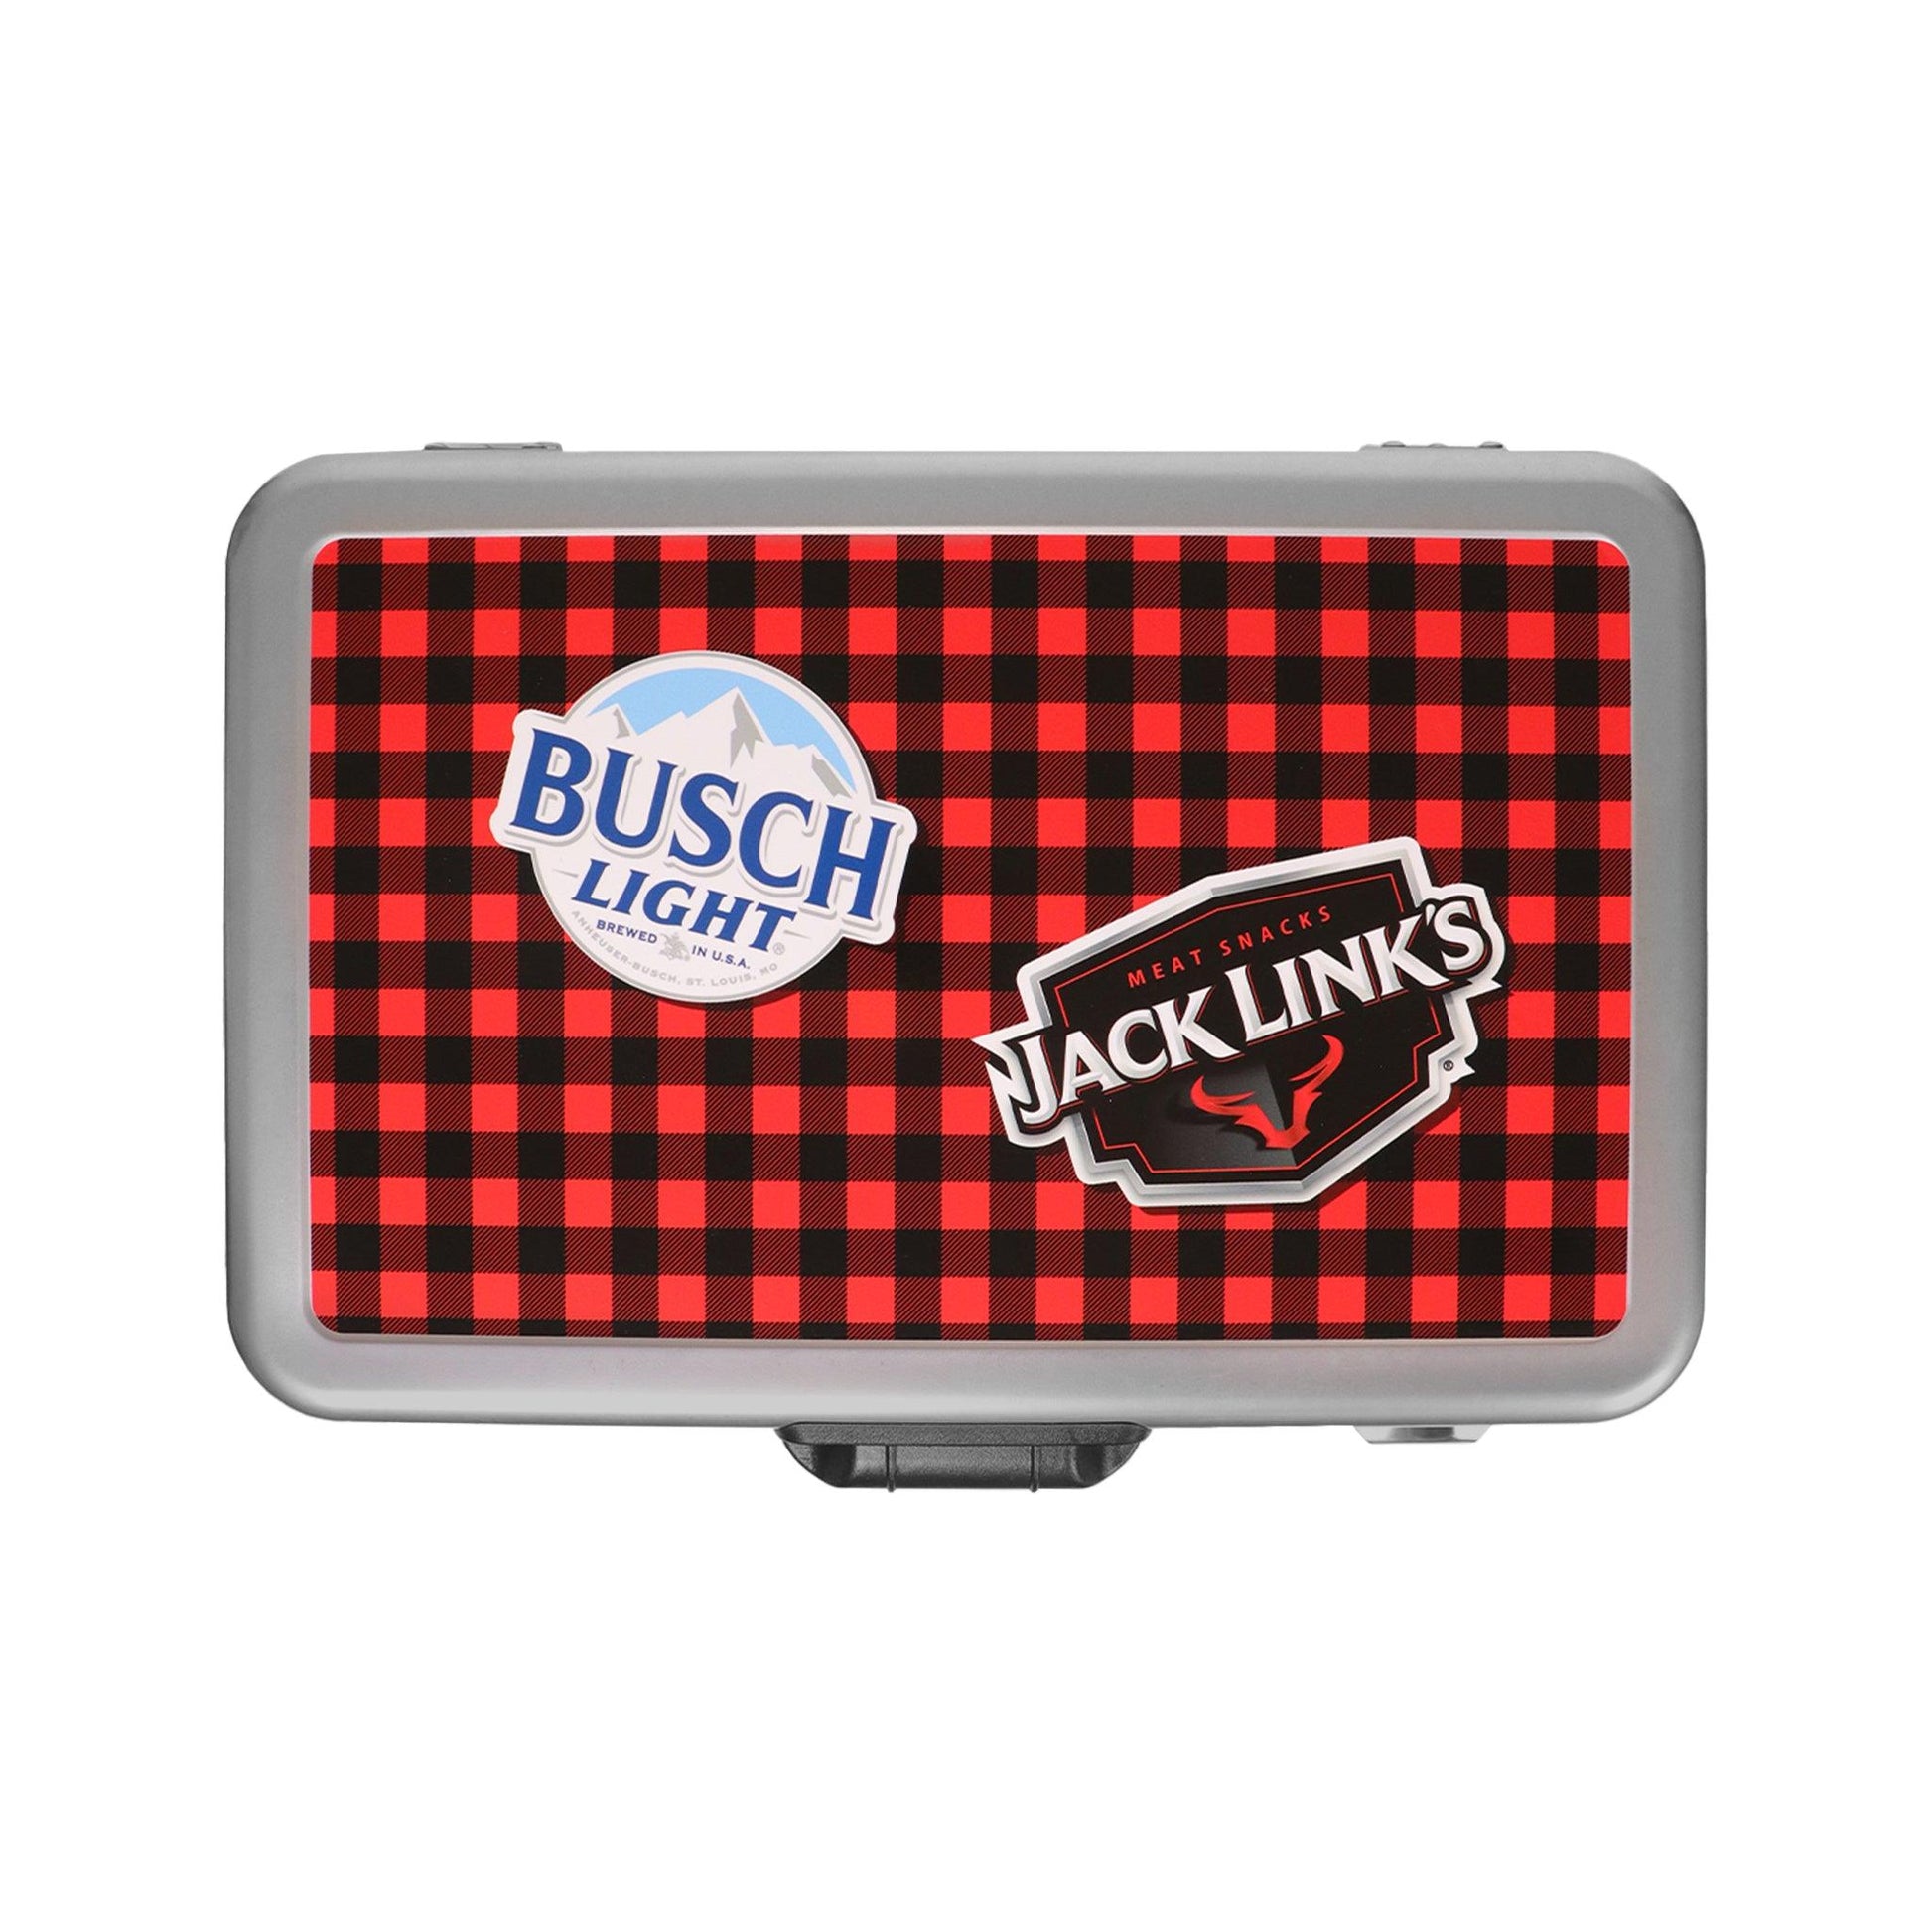 top of cooler with busch light and jack link logo with red and black plaid